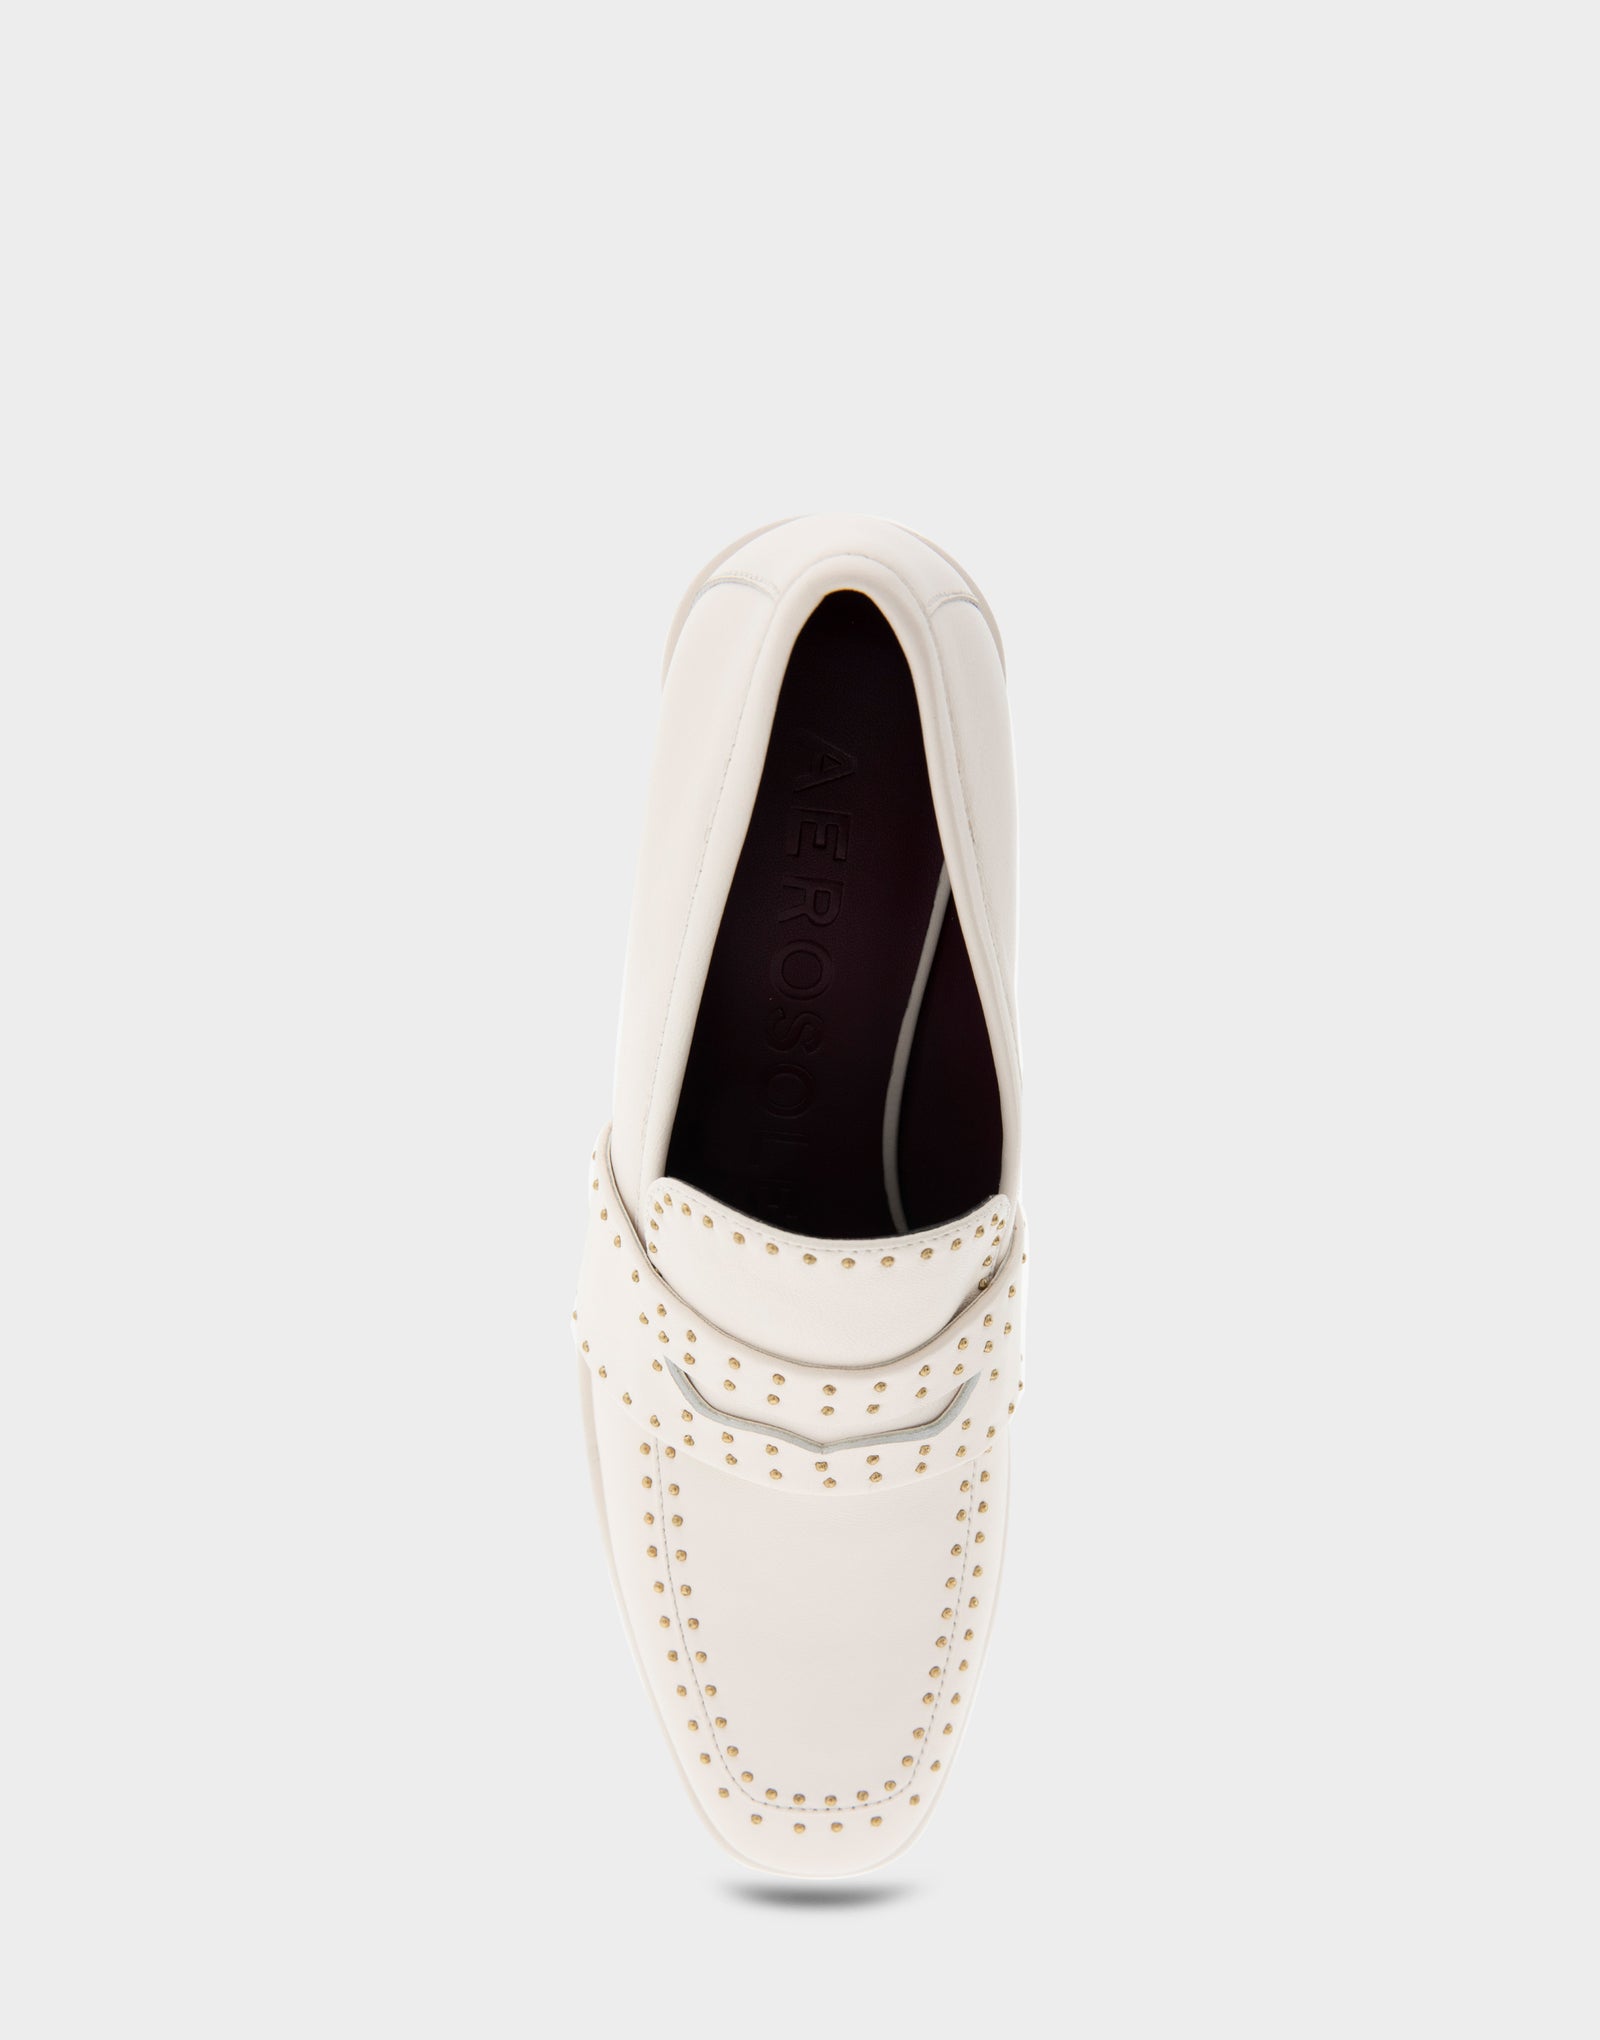 Women's Heeled Loafer in Off White